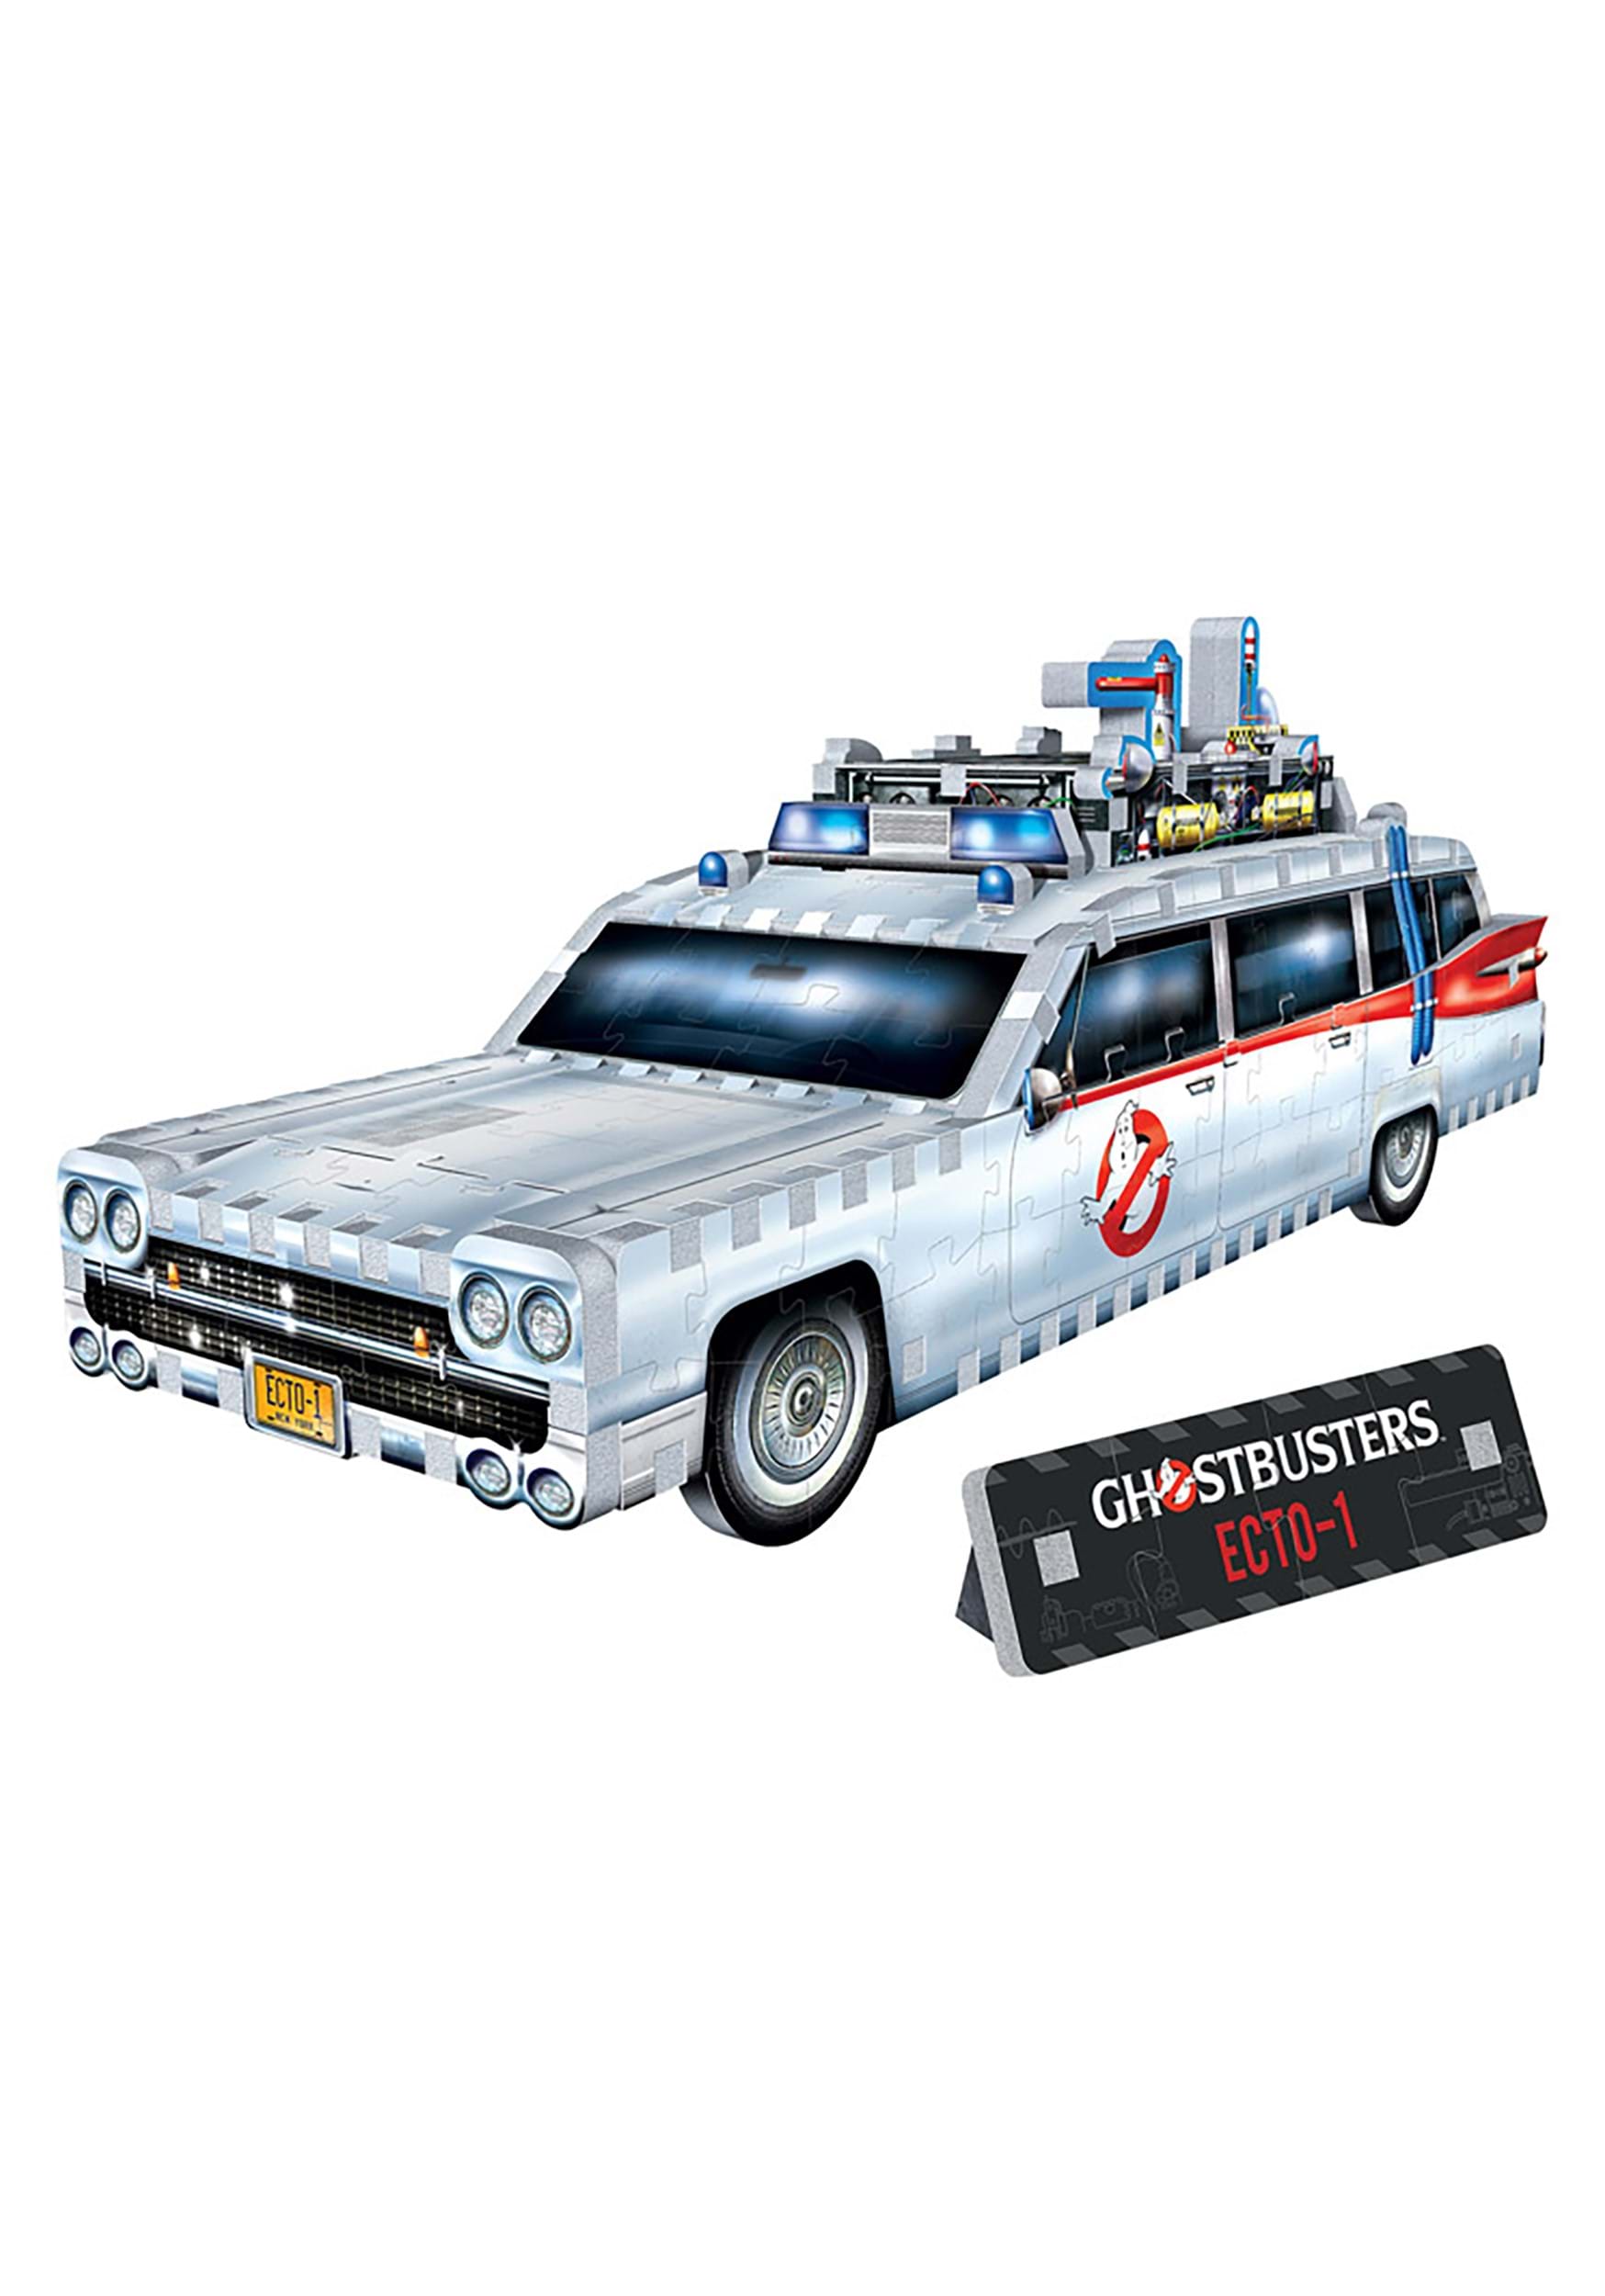 Ecto-1 Ghostbusters 3D Puzzle